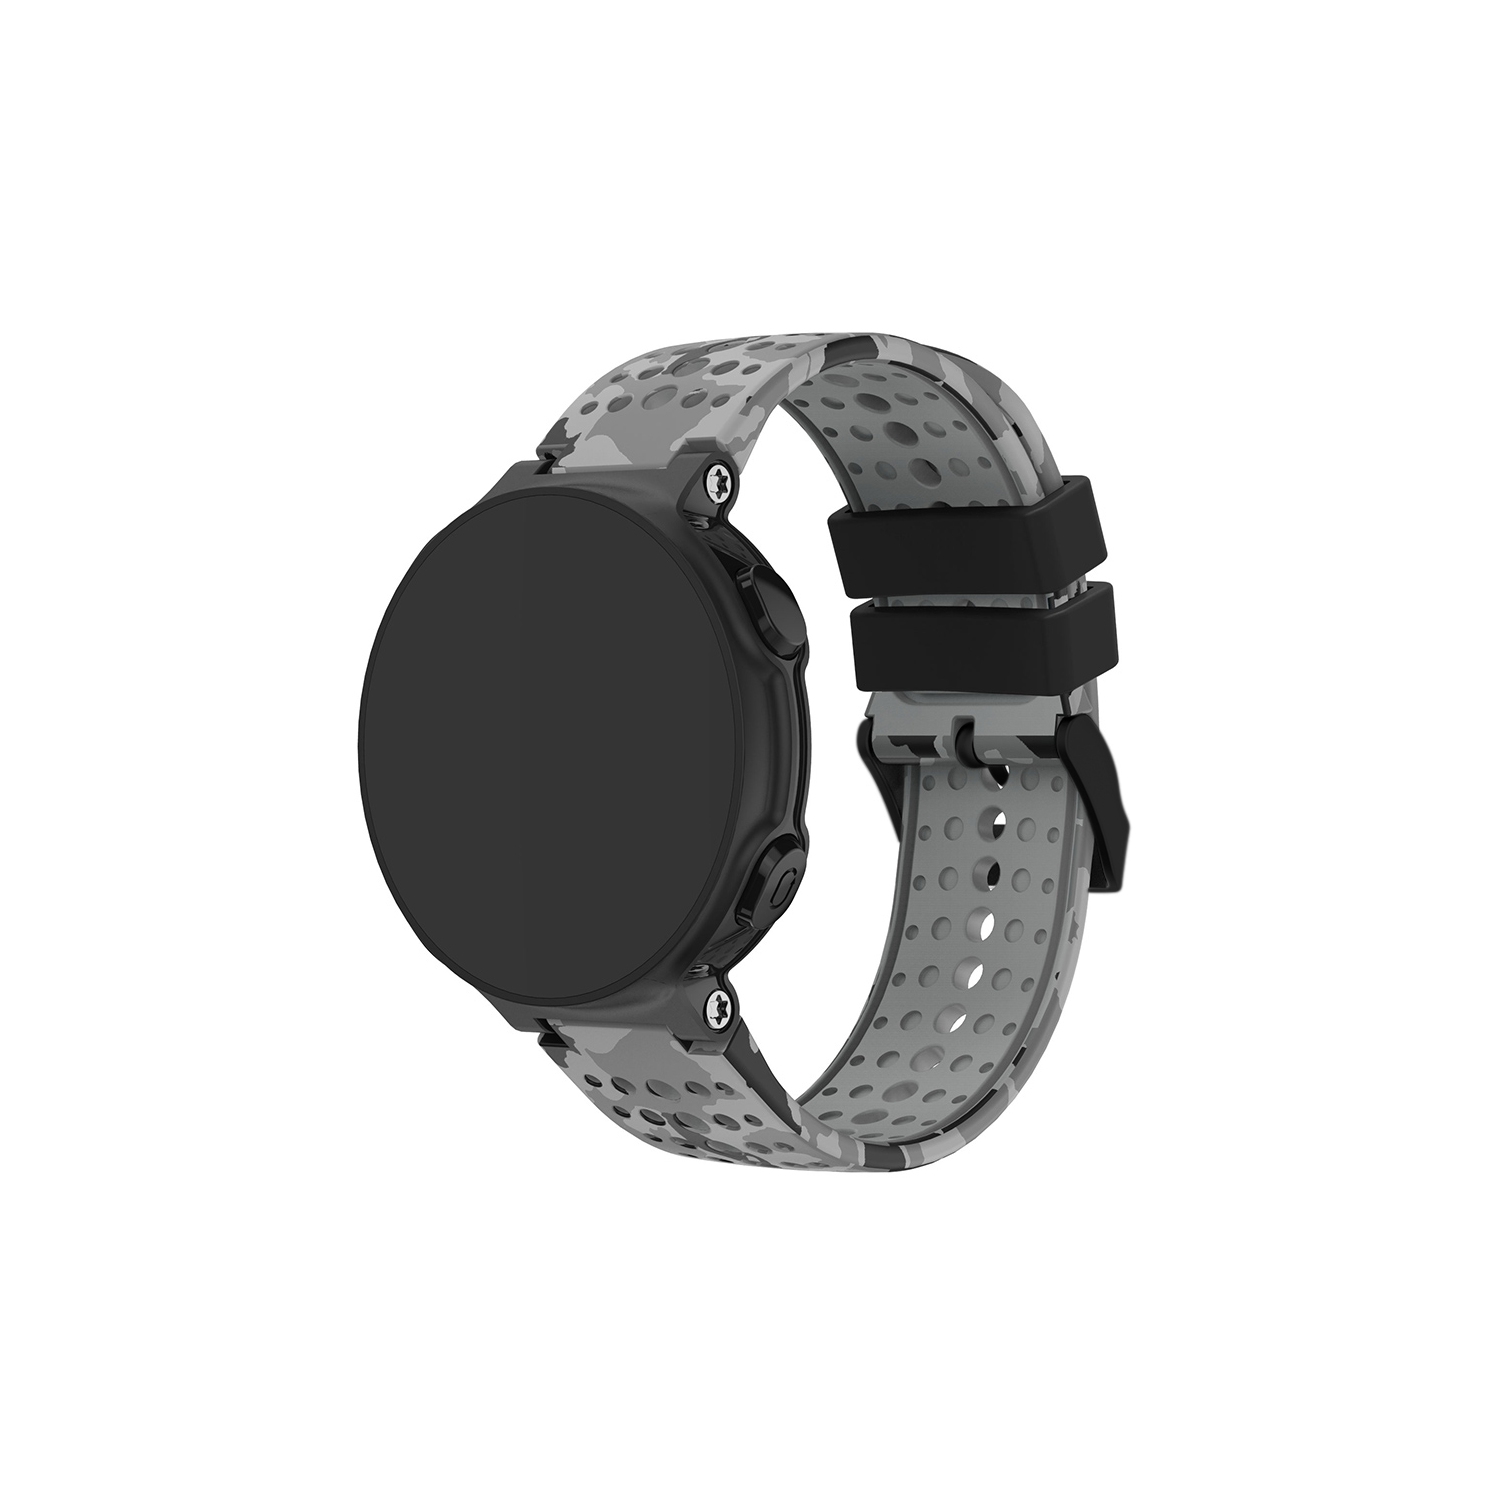 StrapsCo Rubber Watch Band with Black Buckle for Garmin Forerunner 200/230/235/620/630/735XT & Approach S5/S6/S20 - Grey Camo